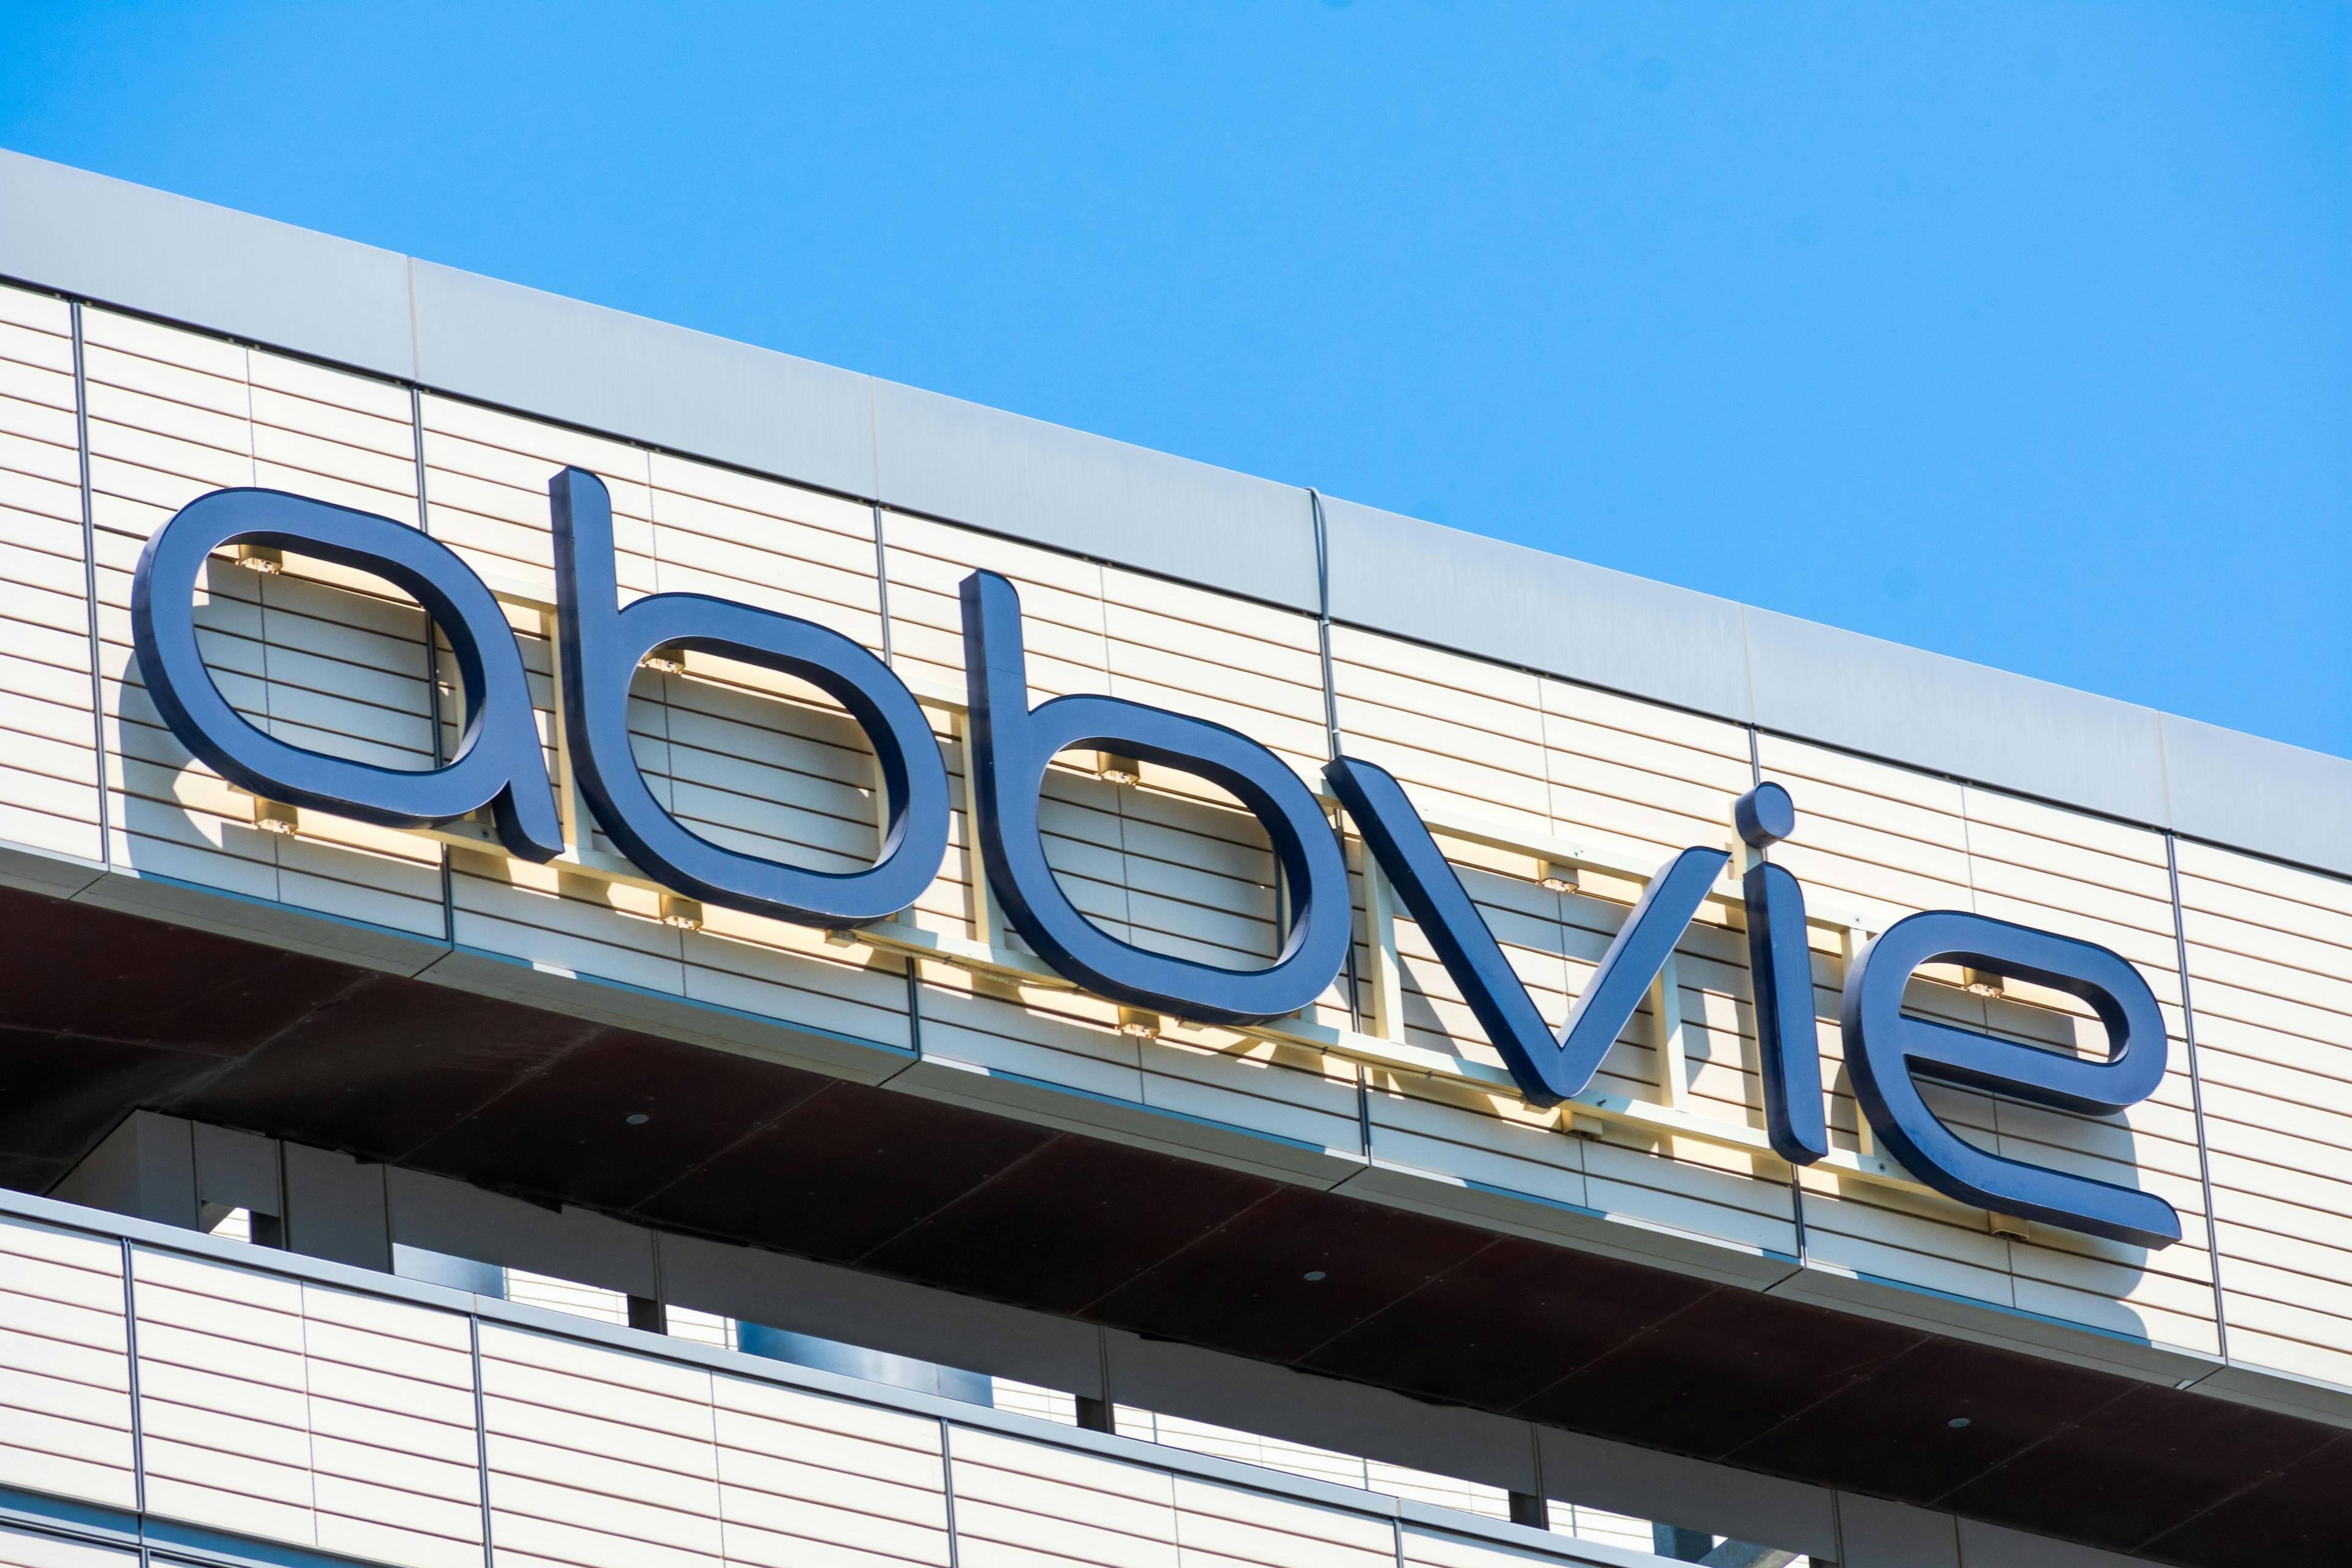 Image credit: MichaelVi | stock.adobe.com. AbbVie sign, logo on headquarters facade of an American publicly traded biopharmaceutical company. 